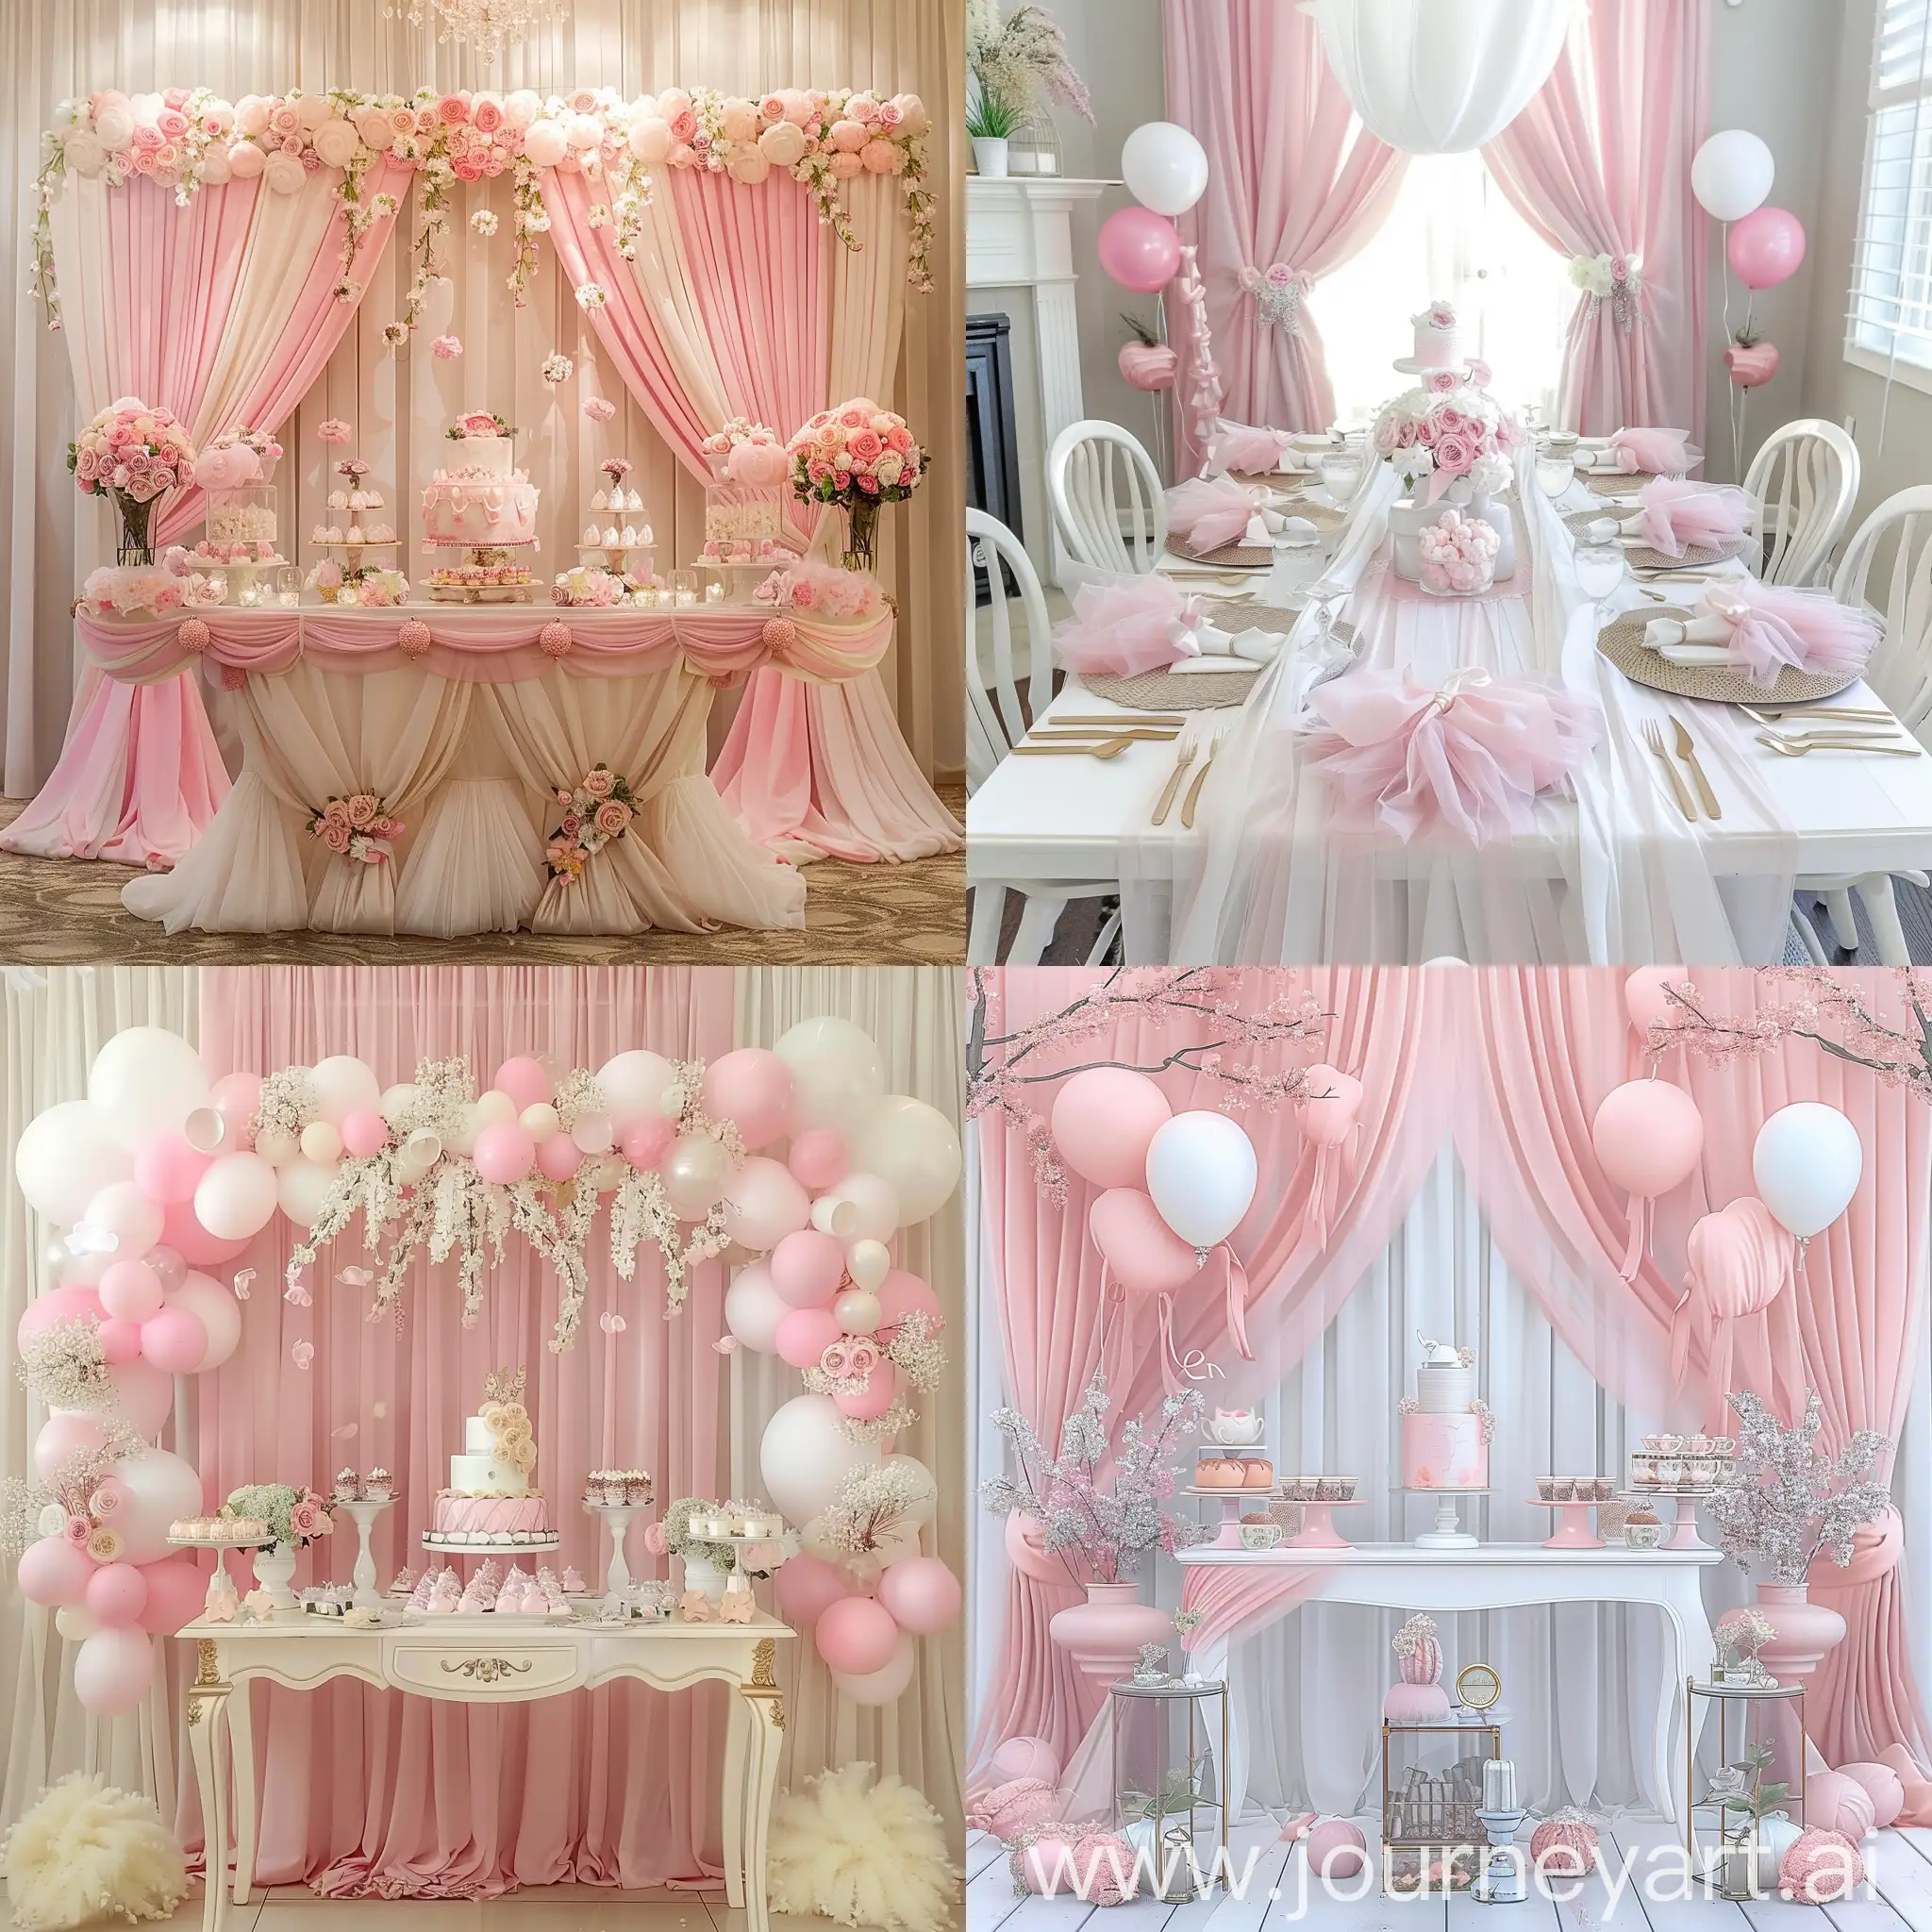 Elegant-Pink-and-White-Table-Decor-with-Bonus-System-and-Referral-Rewards